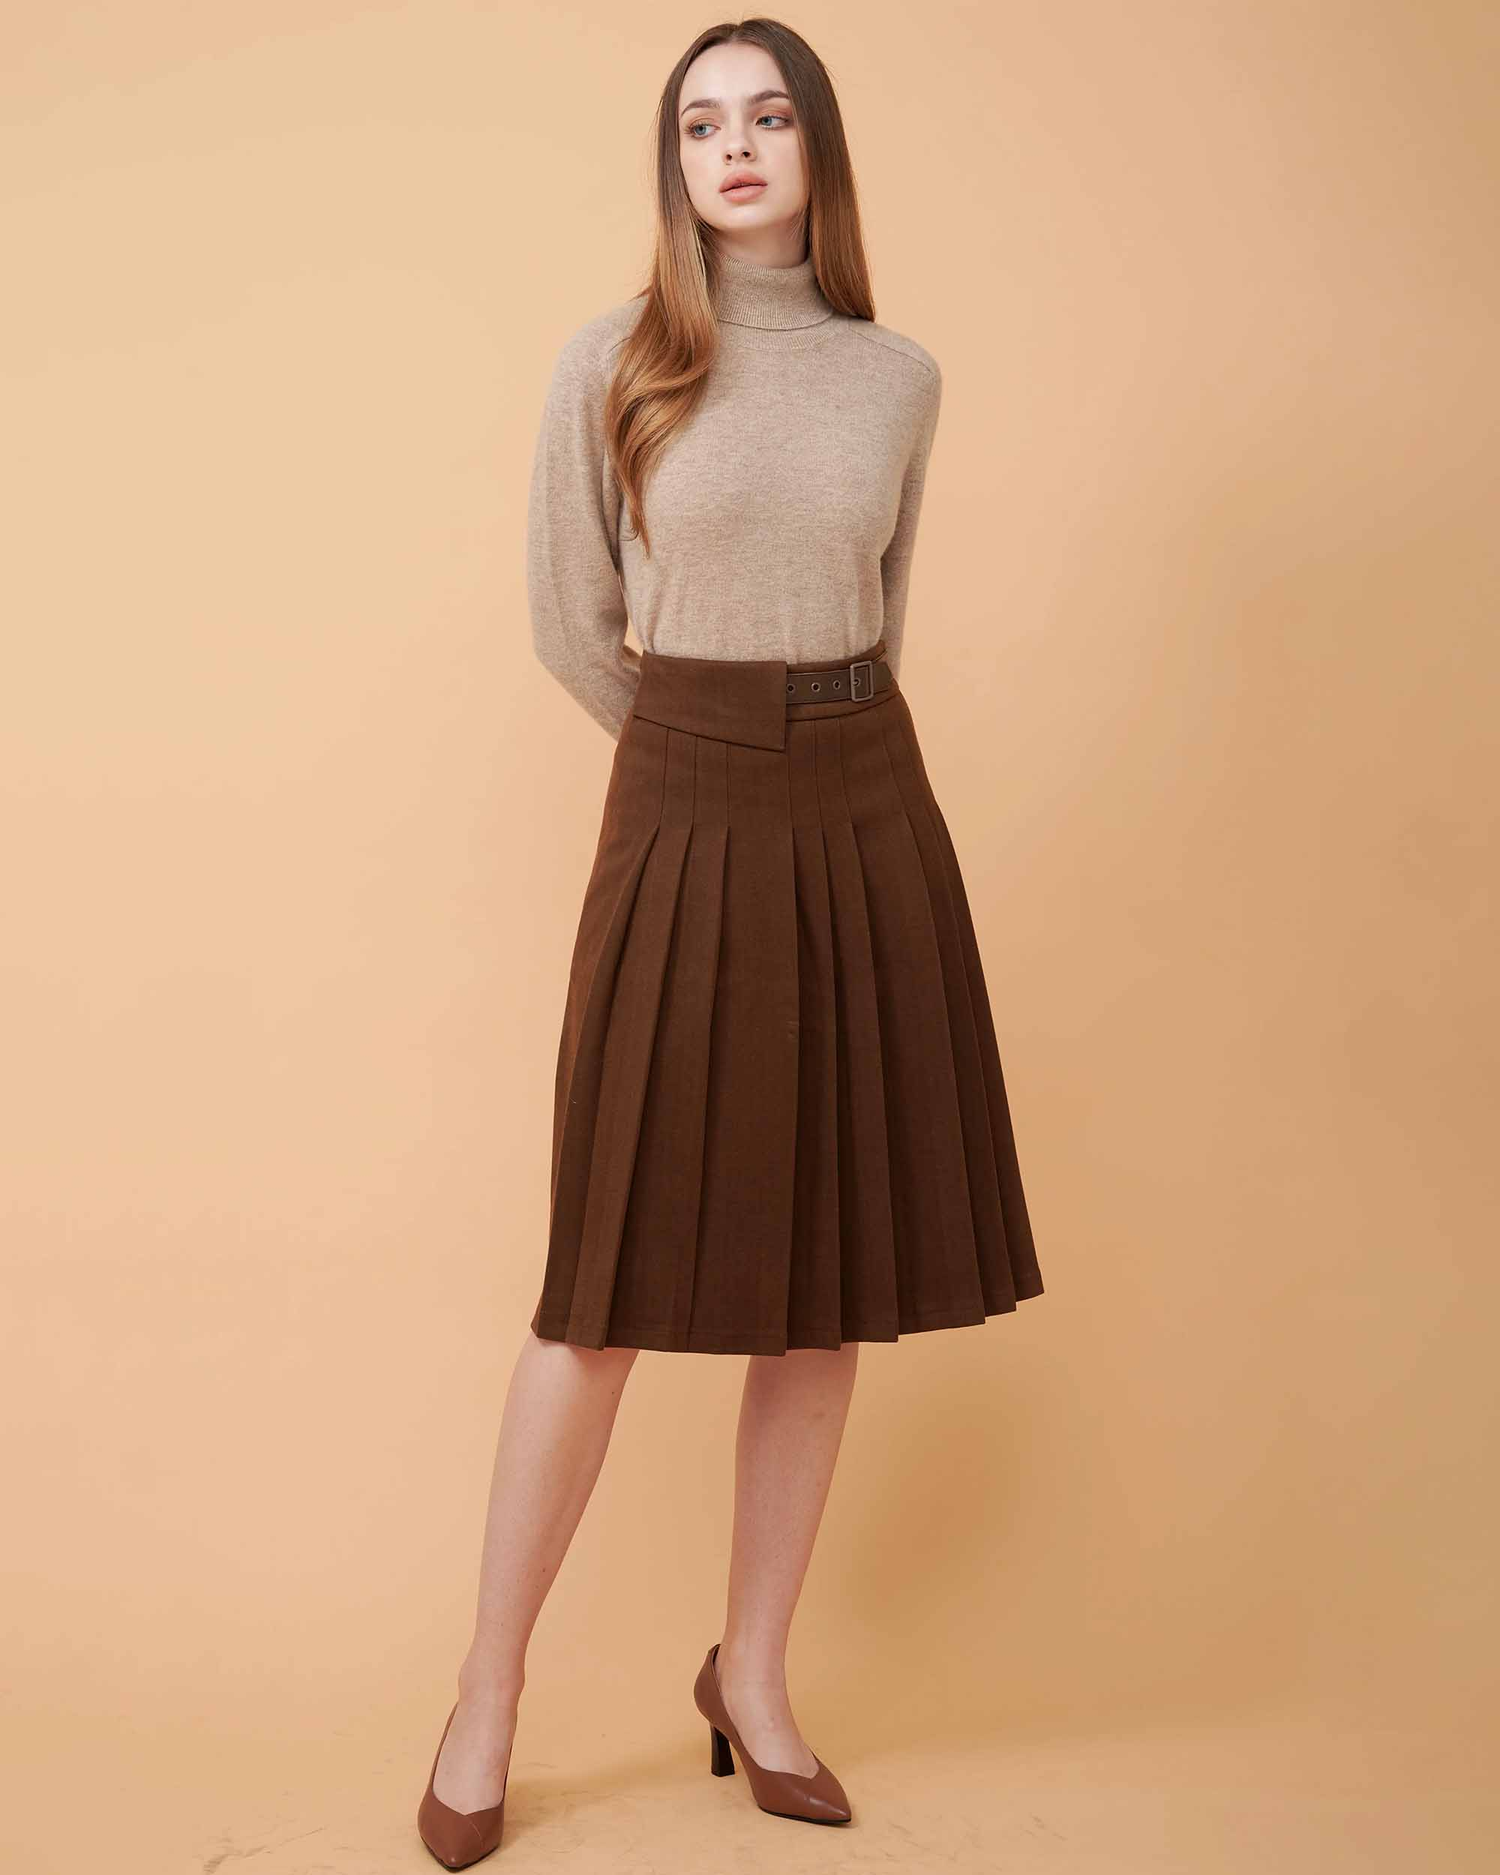 outfit turtleneck davinii cashmere skirt pumps heels pointed footwear model design elegant luxury outfit ideas styling knit knitfashion fashionista fashionable autumn collections closet wardrobe winter fall retail design instagram 